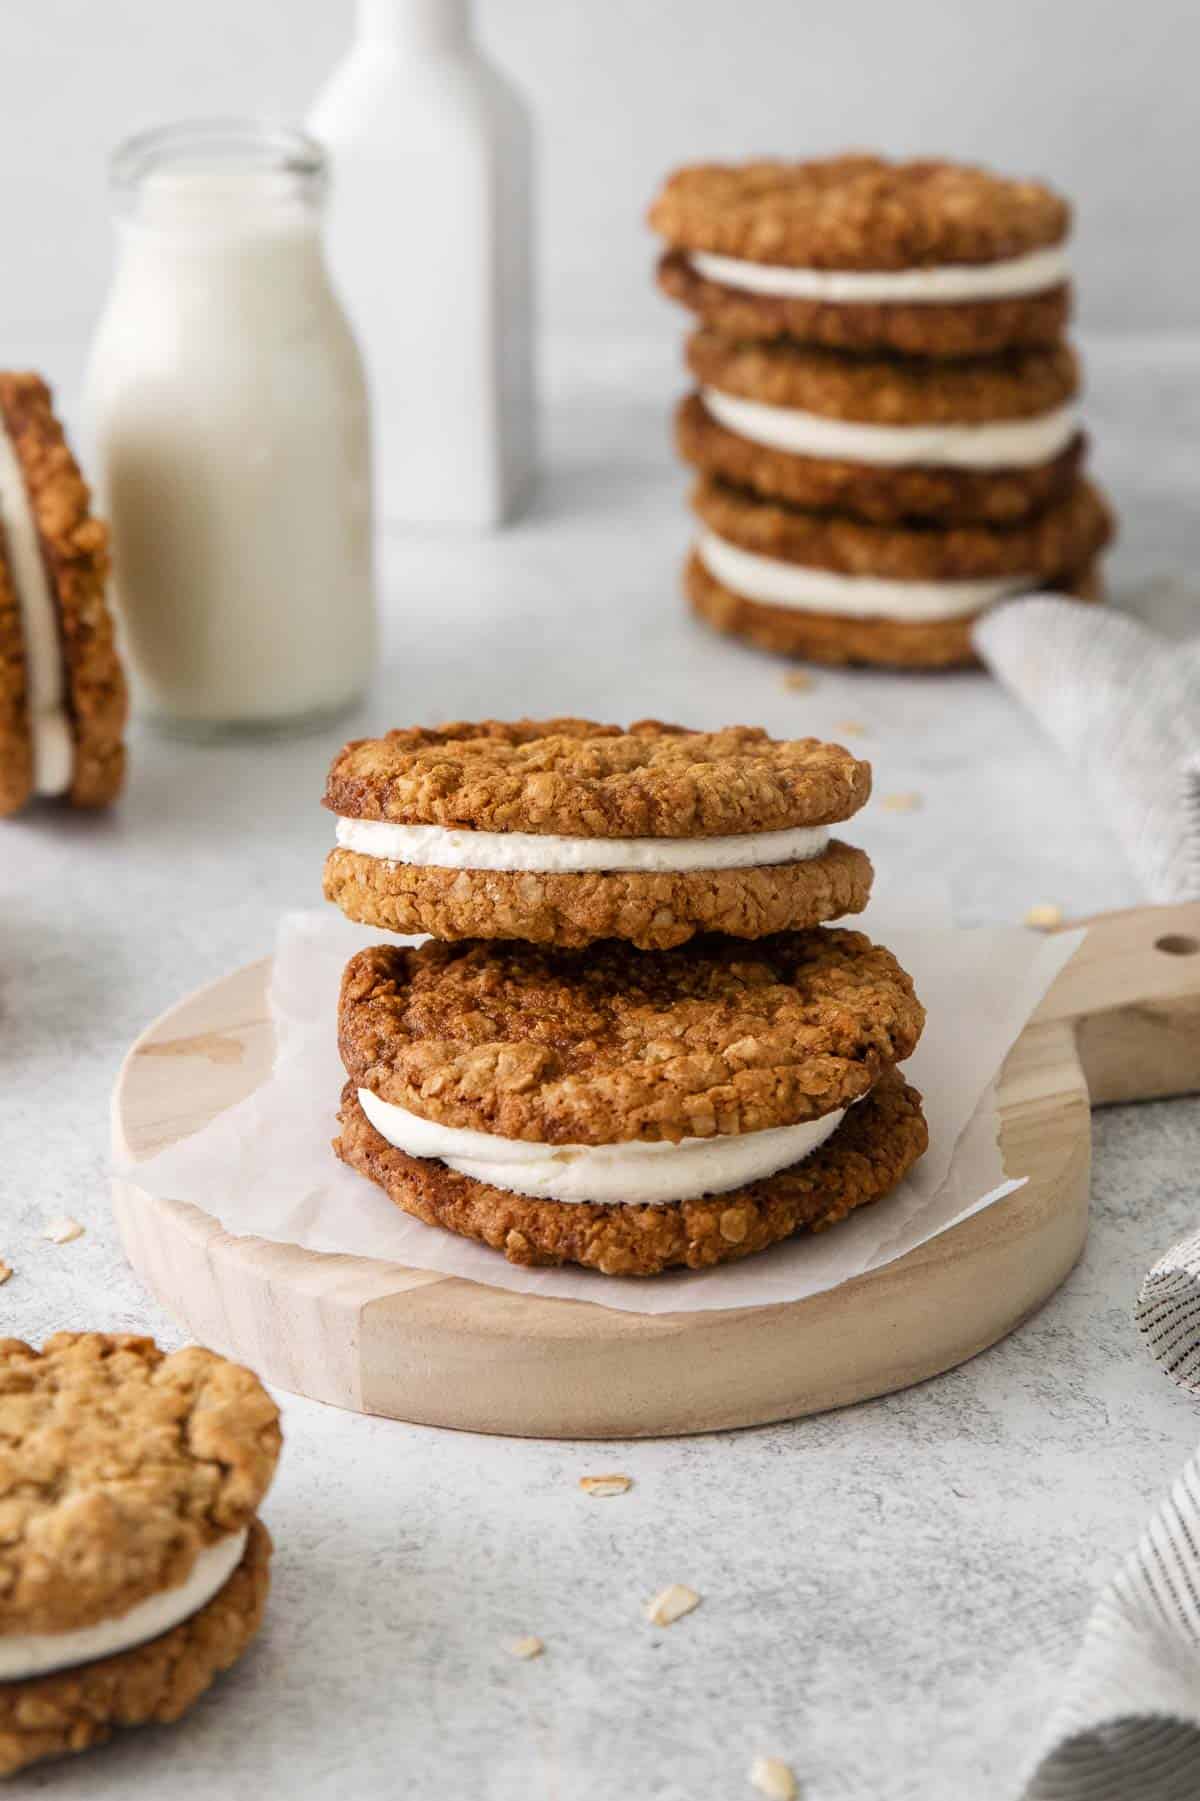 oatmeal cream pies on a platter, with milk and more cookies in the background